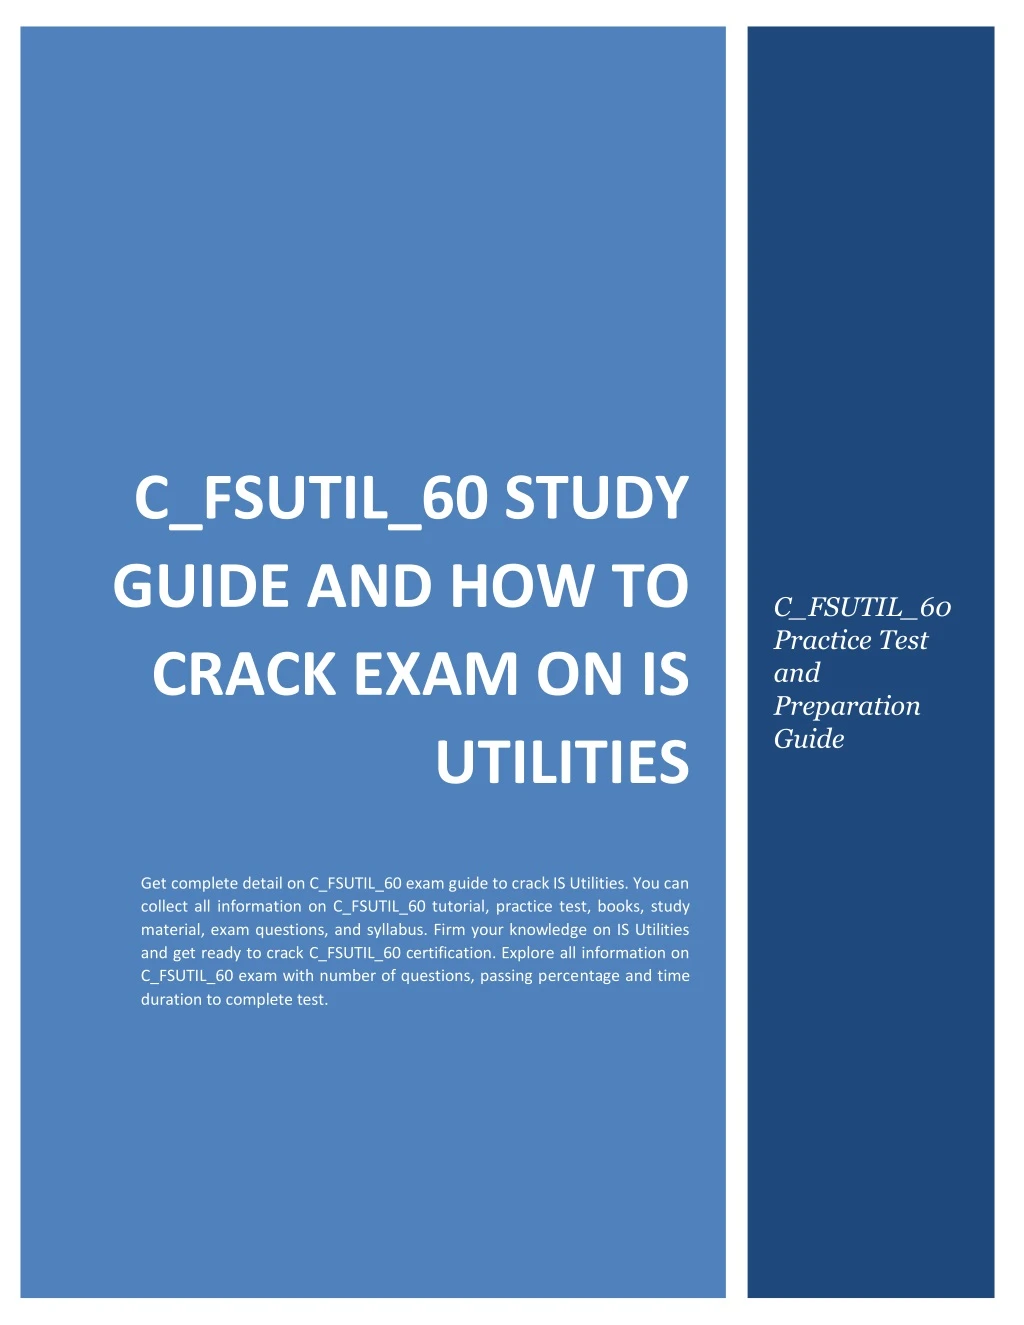 c fsutil 60 study guide and how to crack exam